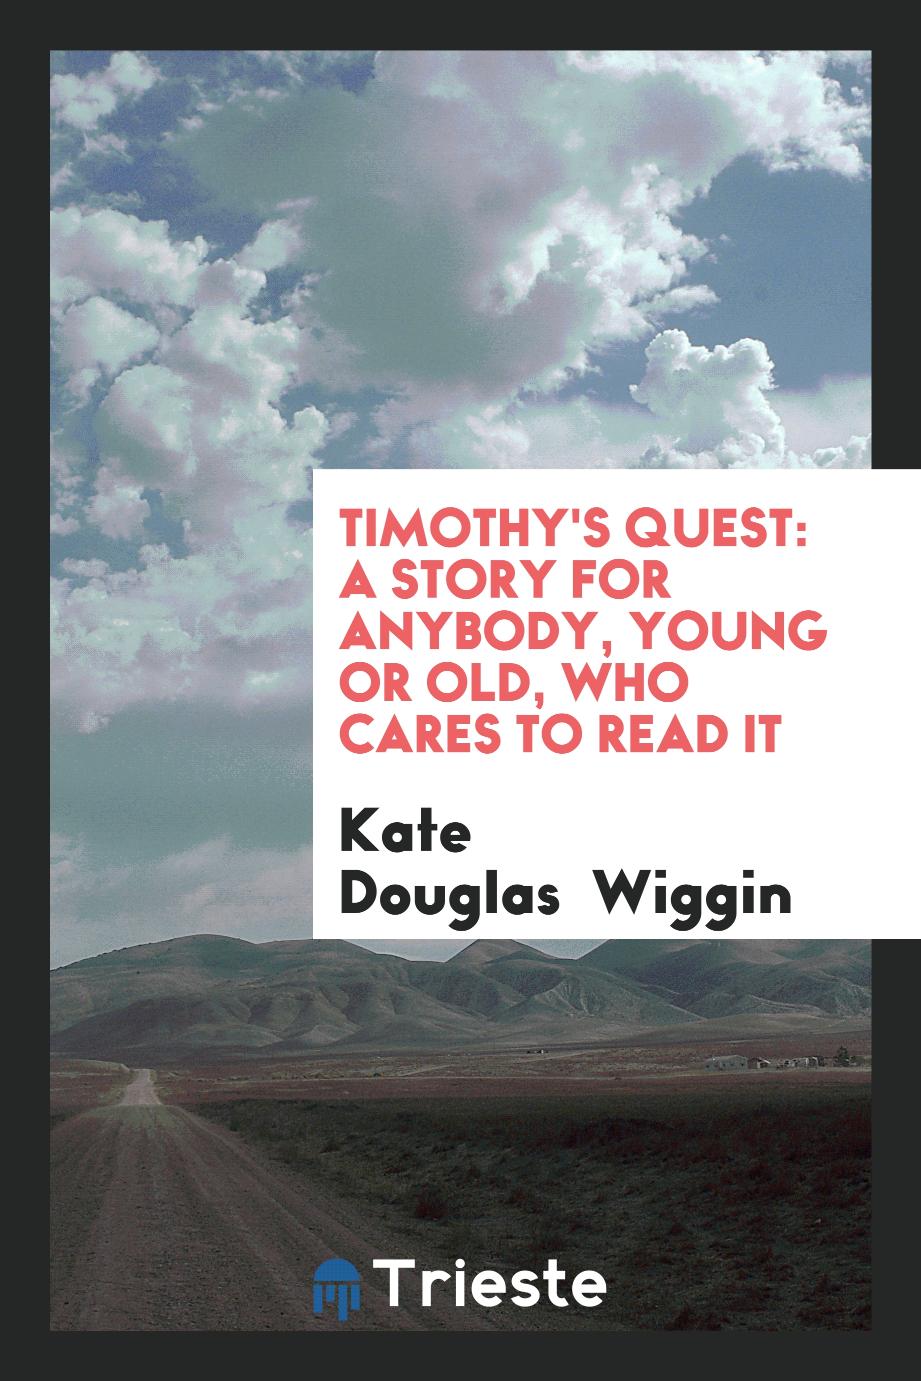 Timothy's quest: a story for anybody, young or old, who cares to read it